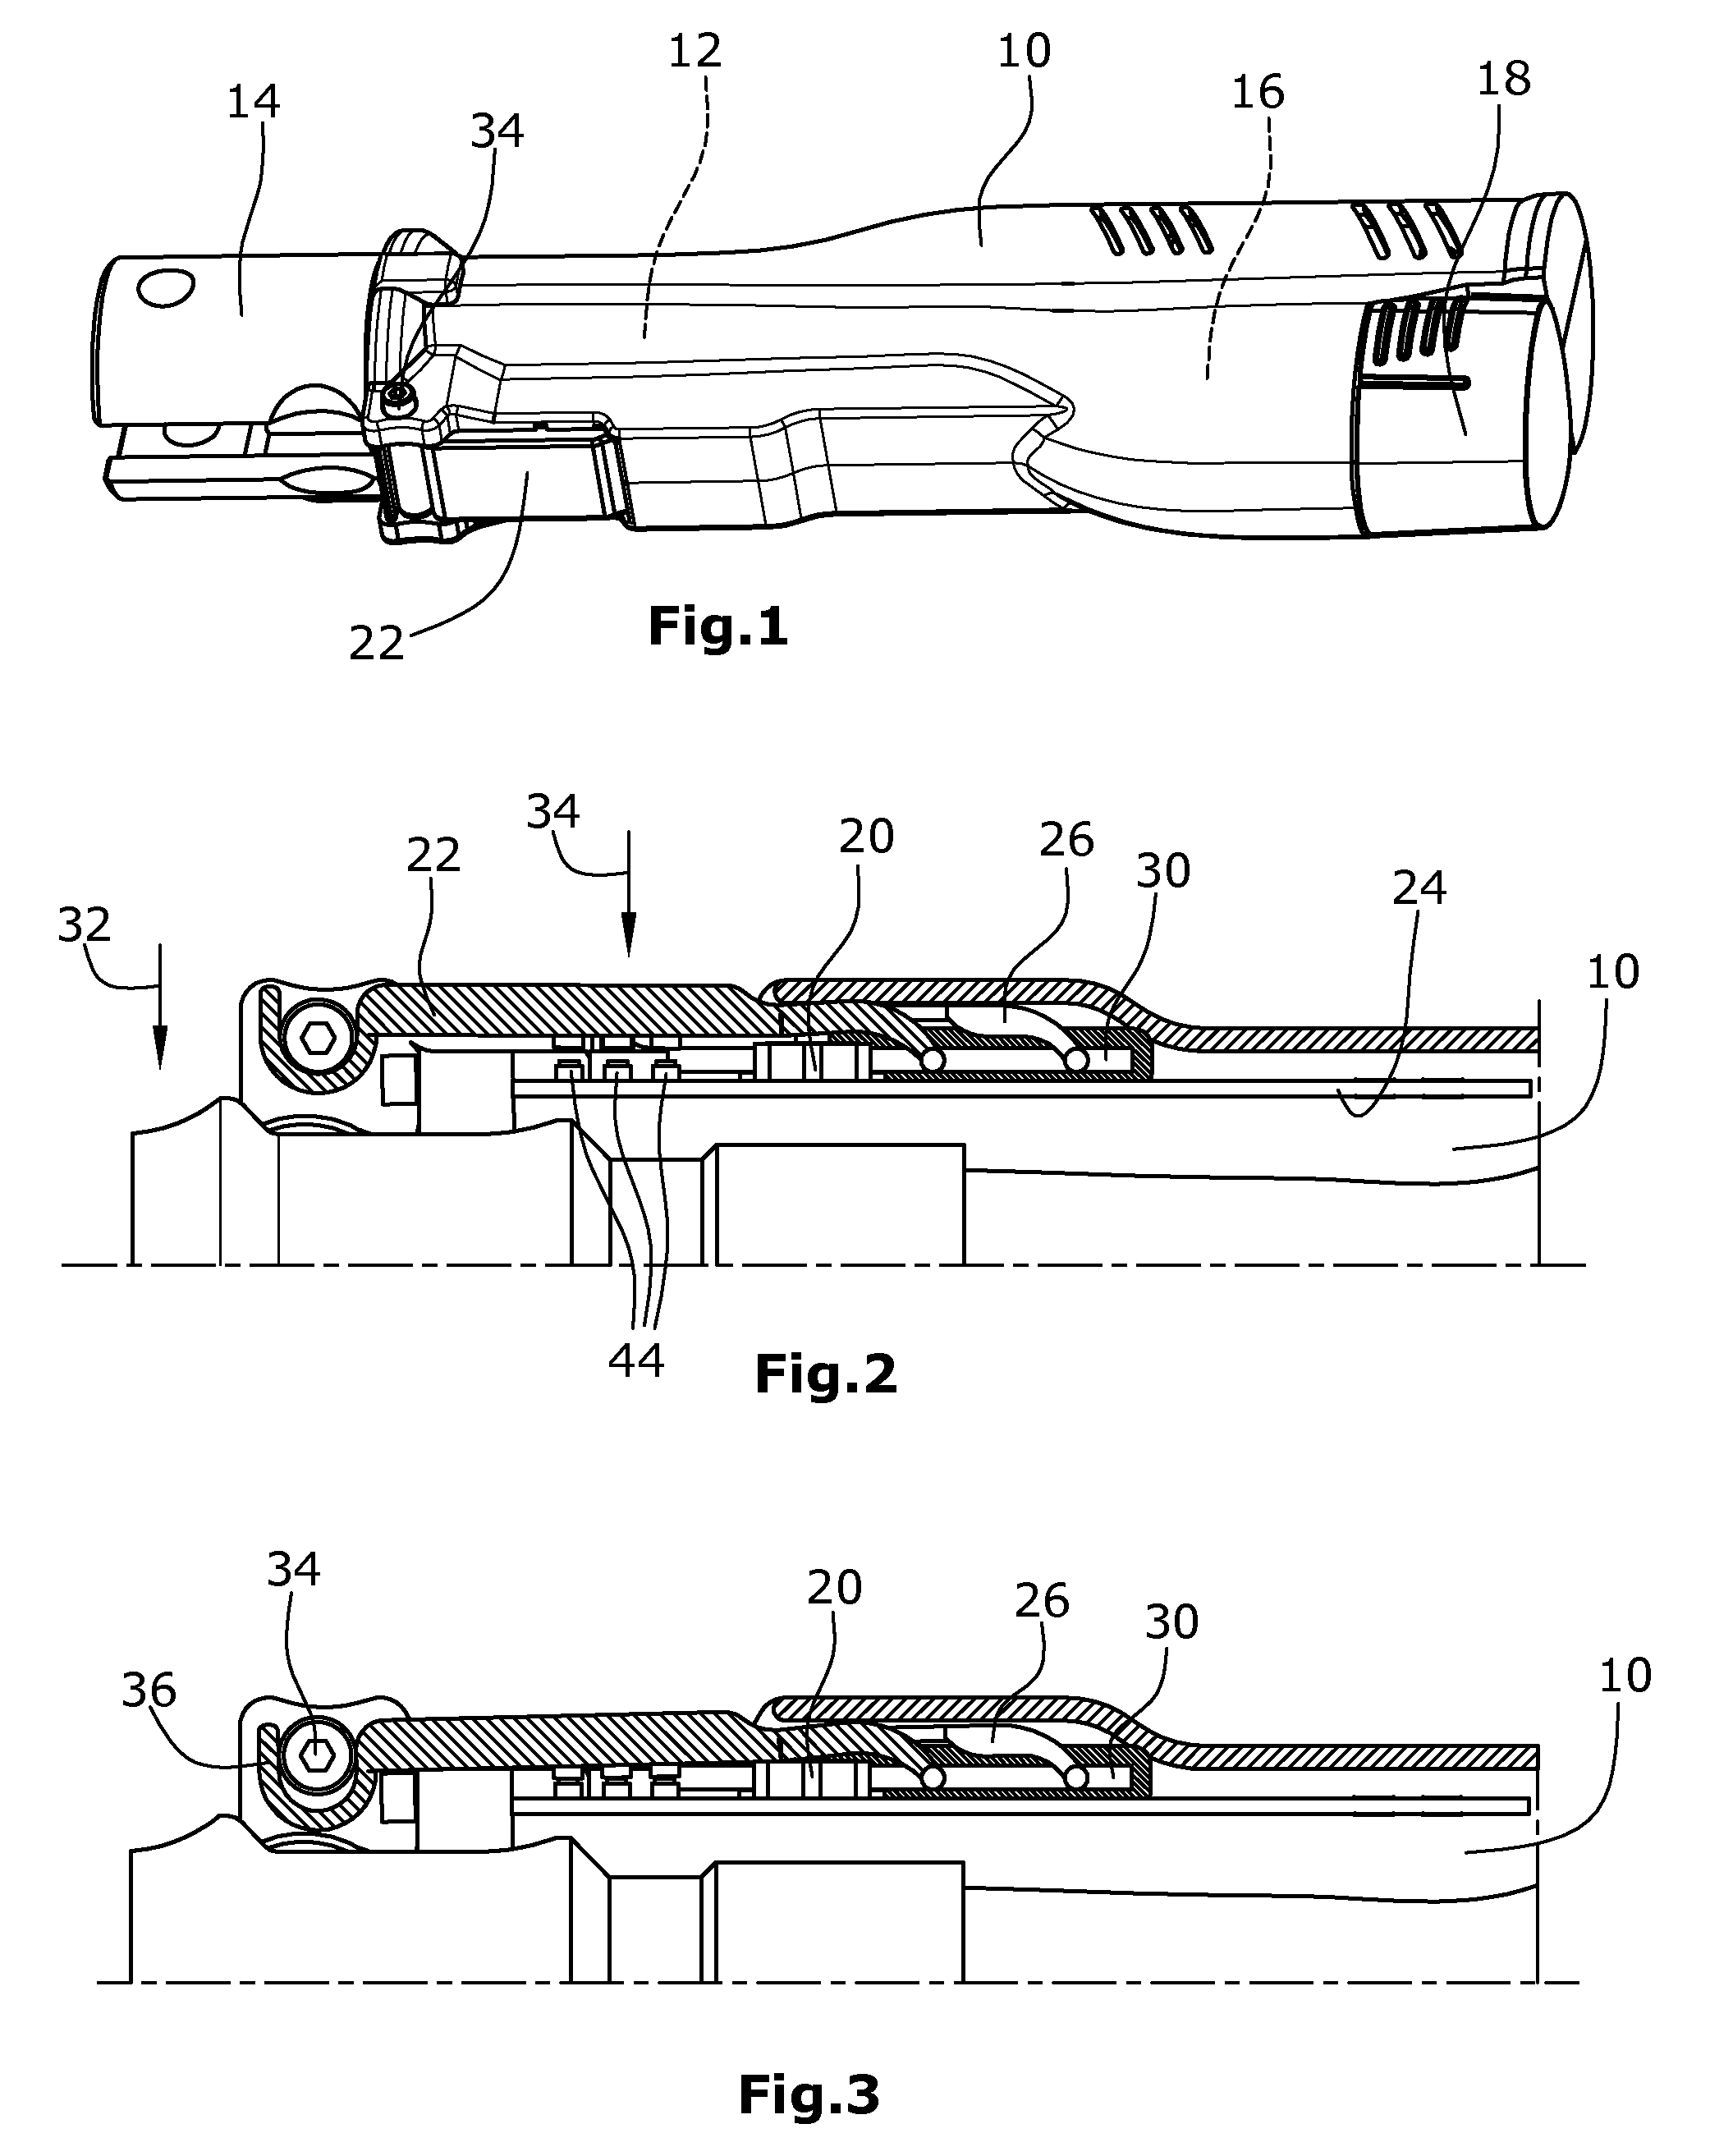 Hand-operated pressing tool